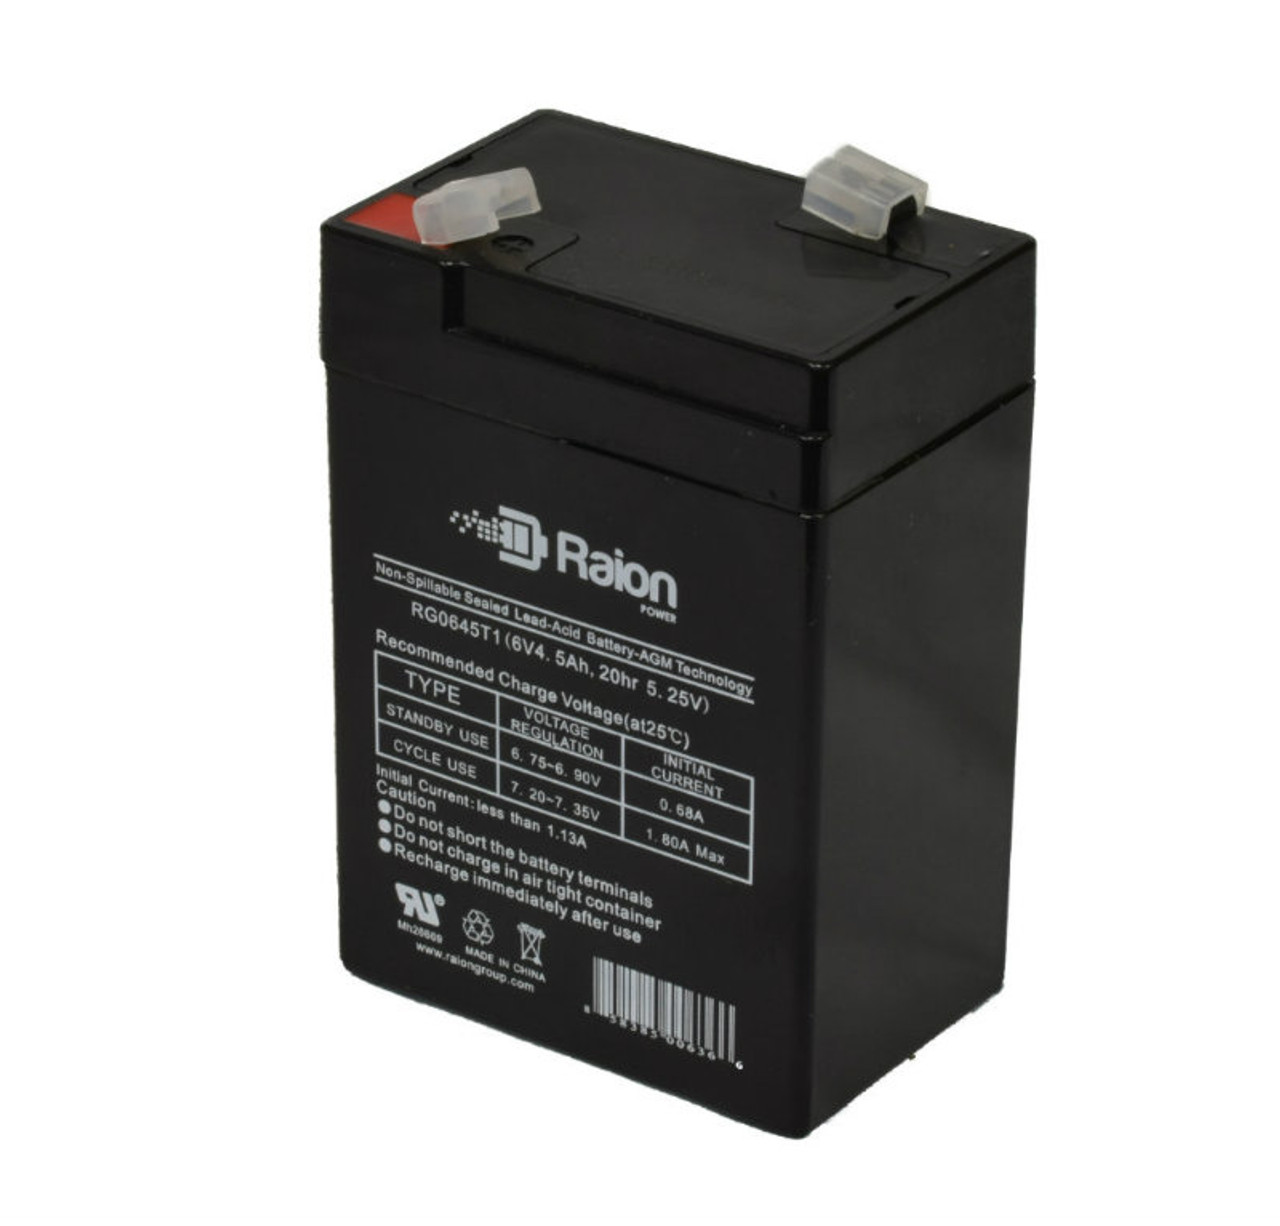 Raion Power RG0645T1 6V 4.5Ah Replacement Battery Cartridge for Gaston GT6-4.5C